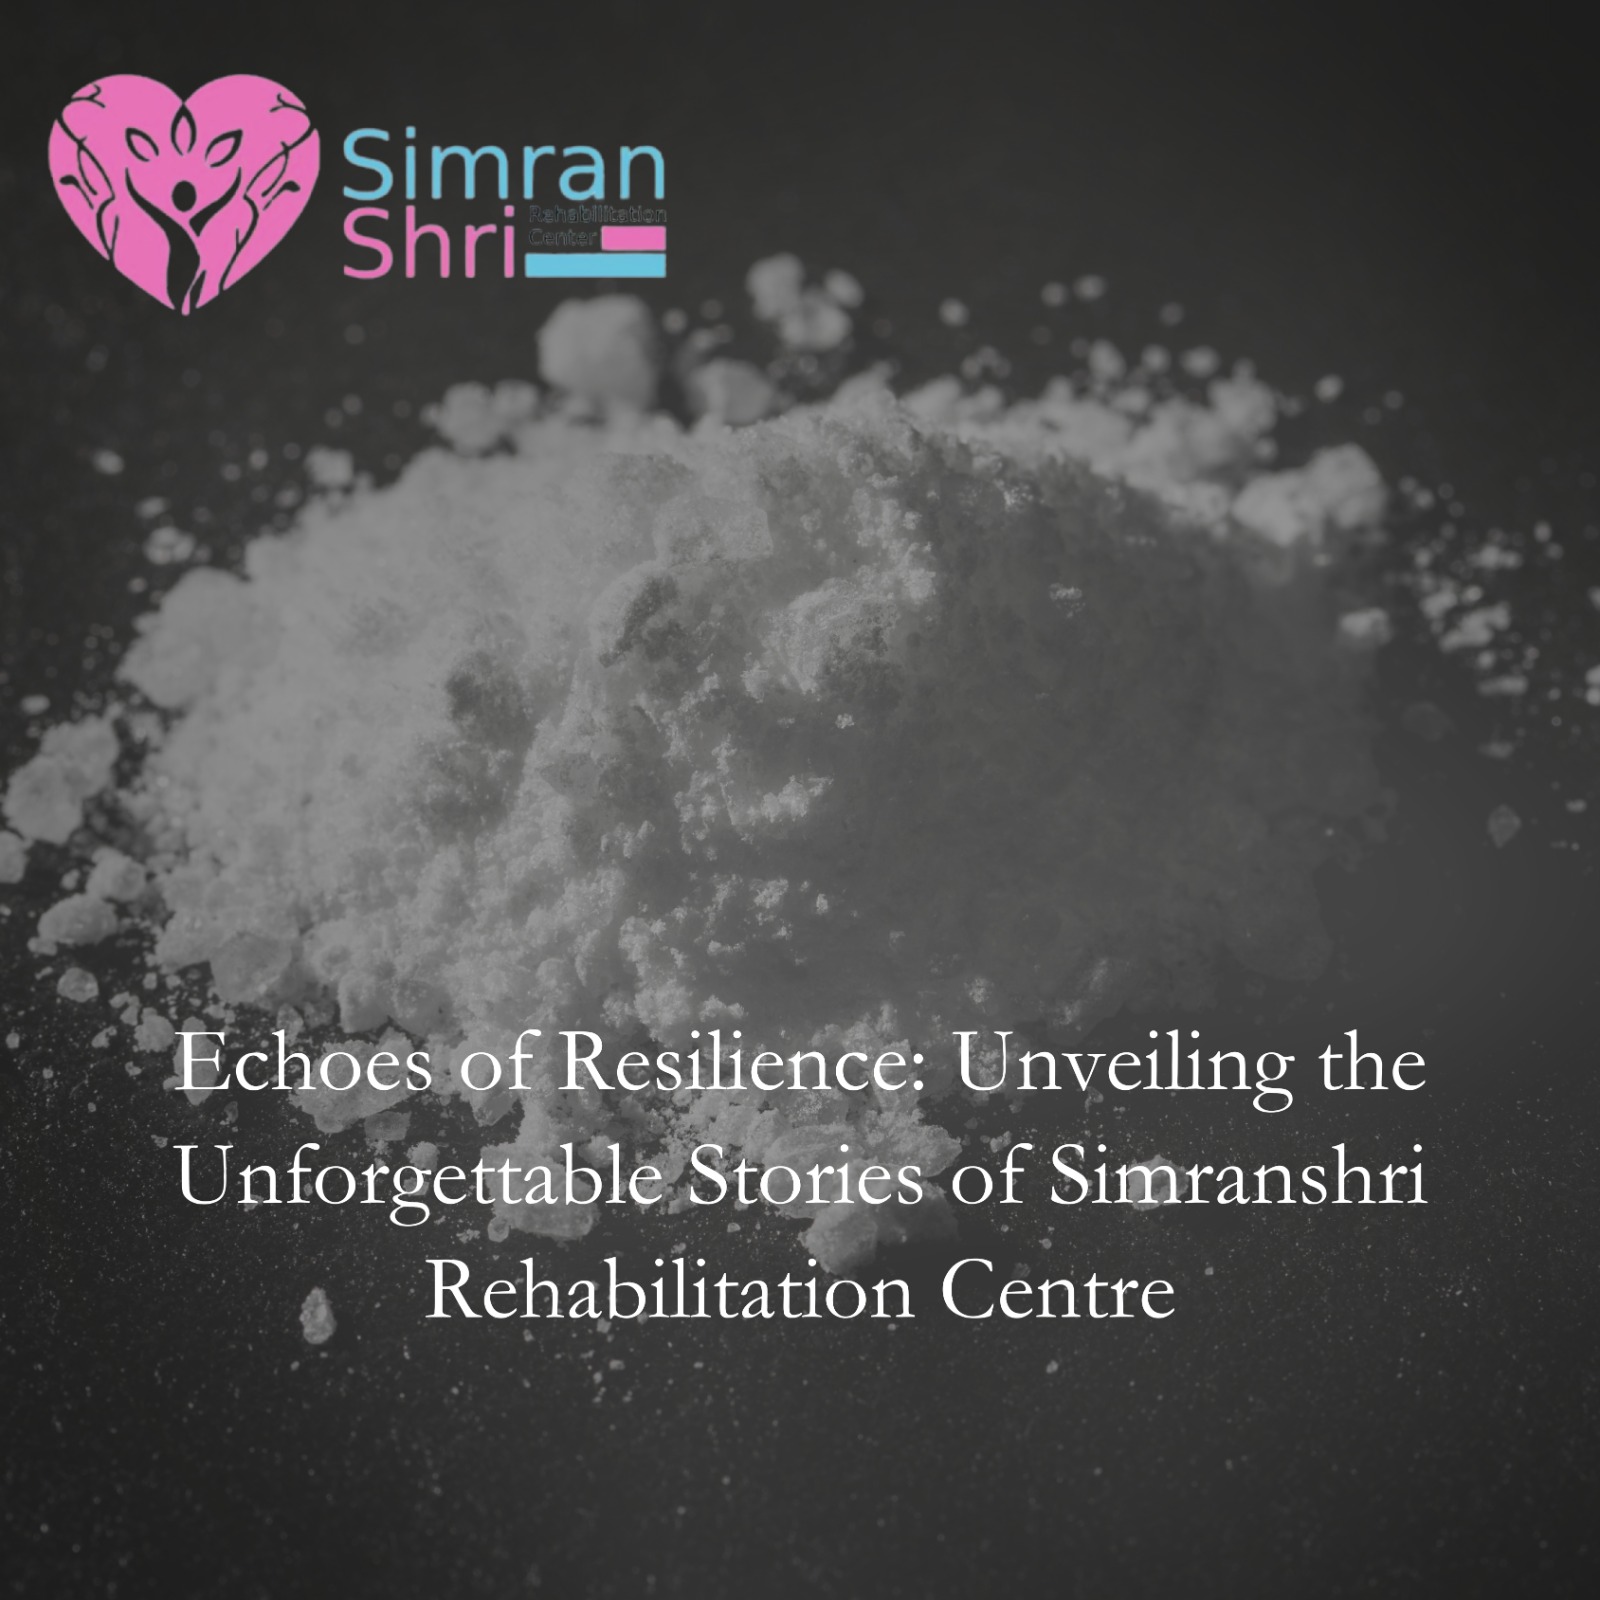 : Echoes of Resilience: Unveiling the Unforgettable Stories of Simranshri Rehabilitation Centre